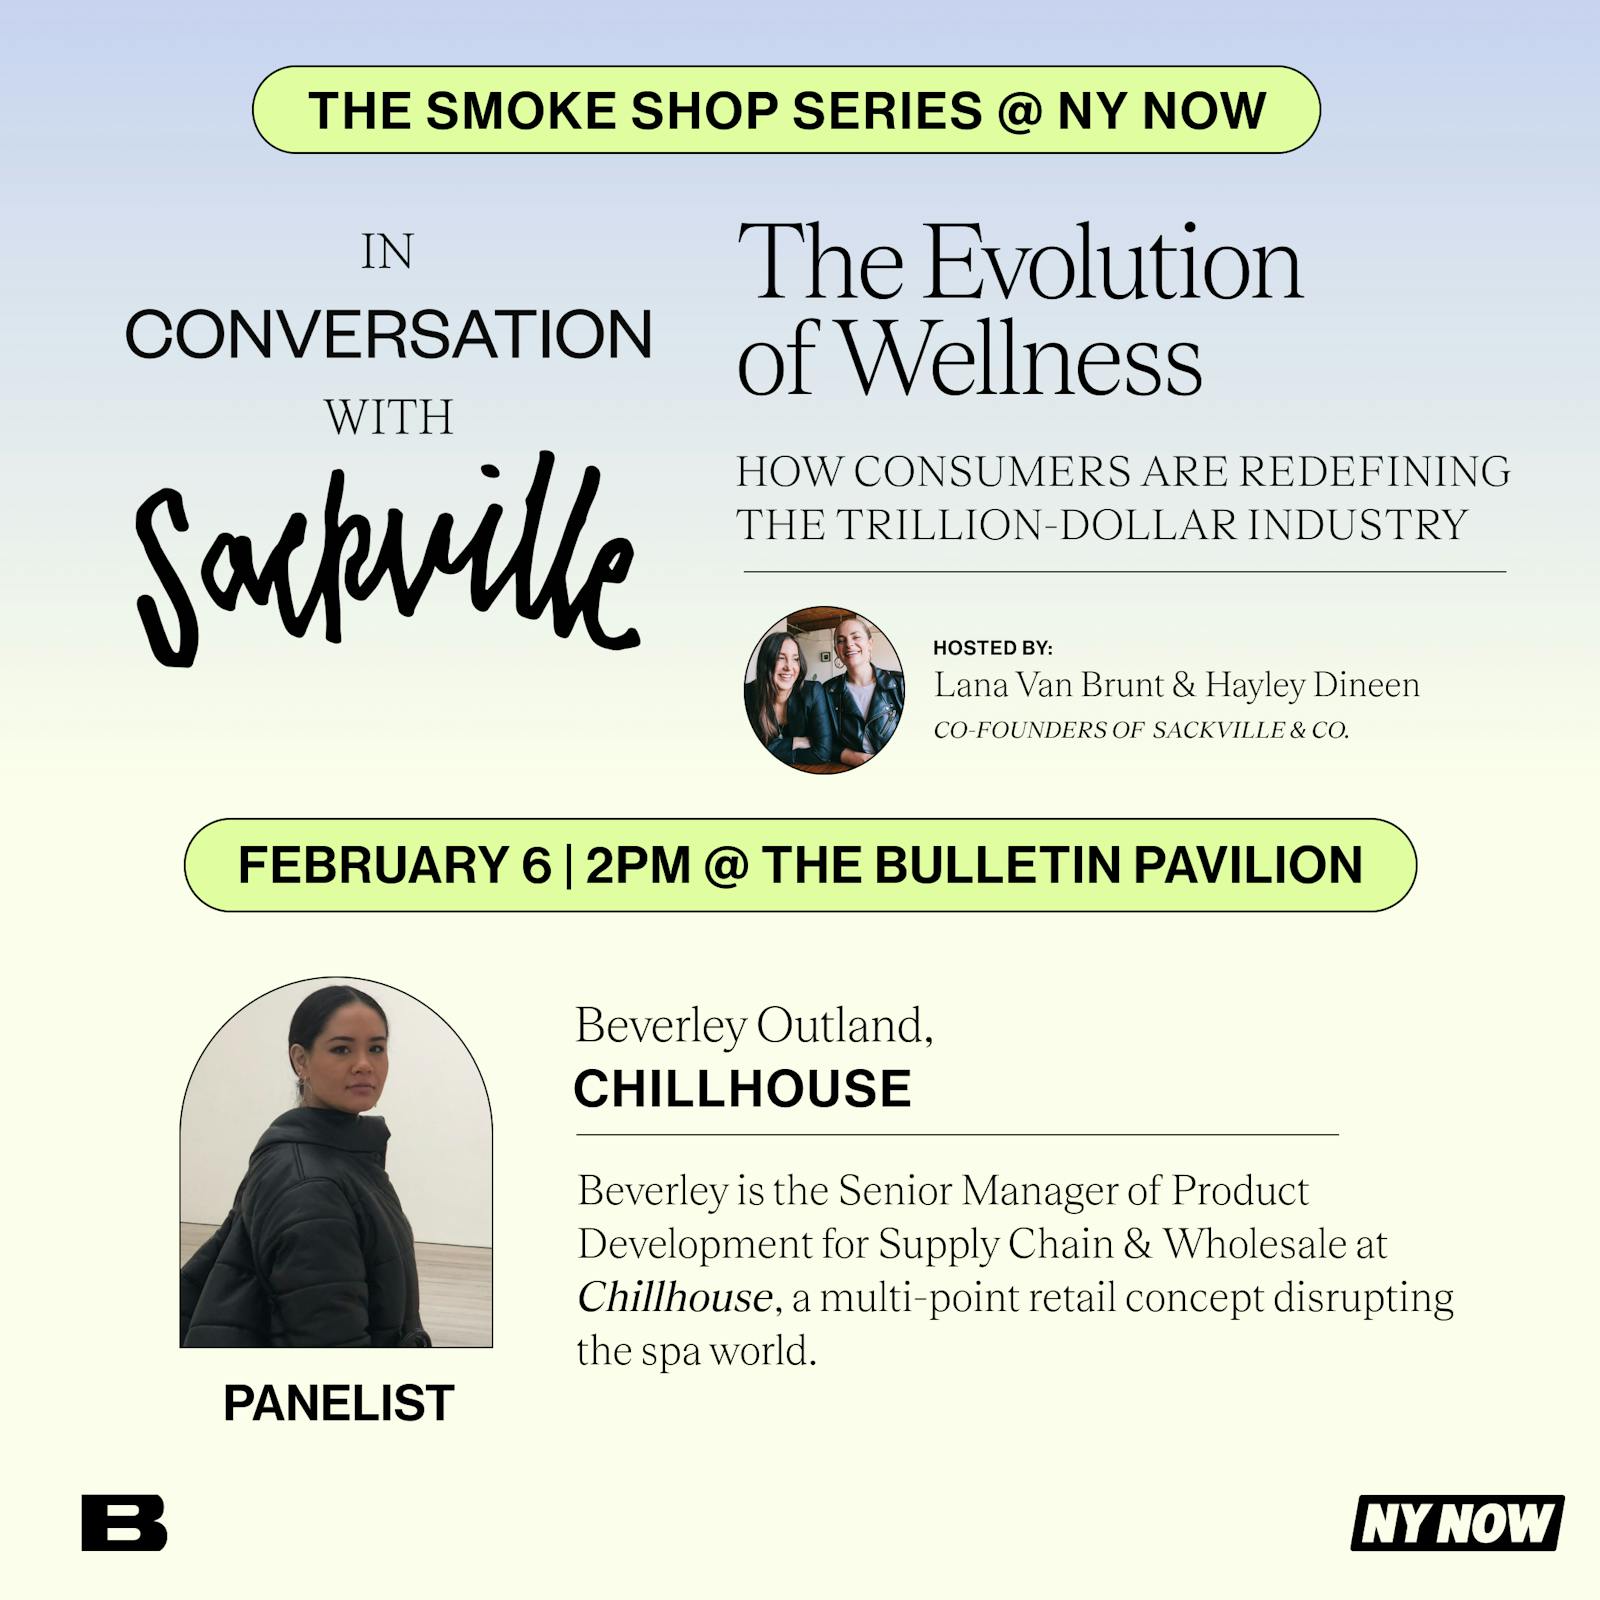 "The Evolution of Wellness" with Beverley Outland – The Smoke Shop Series @ NY NOW